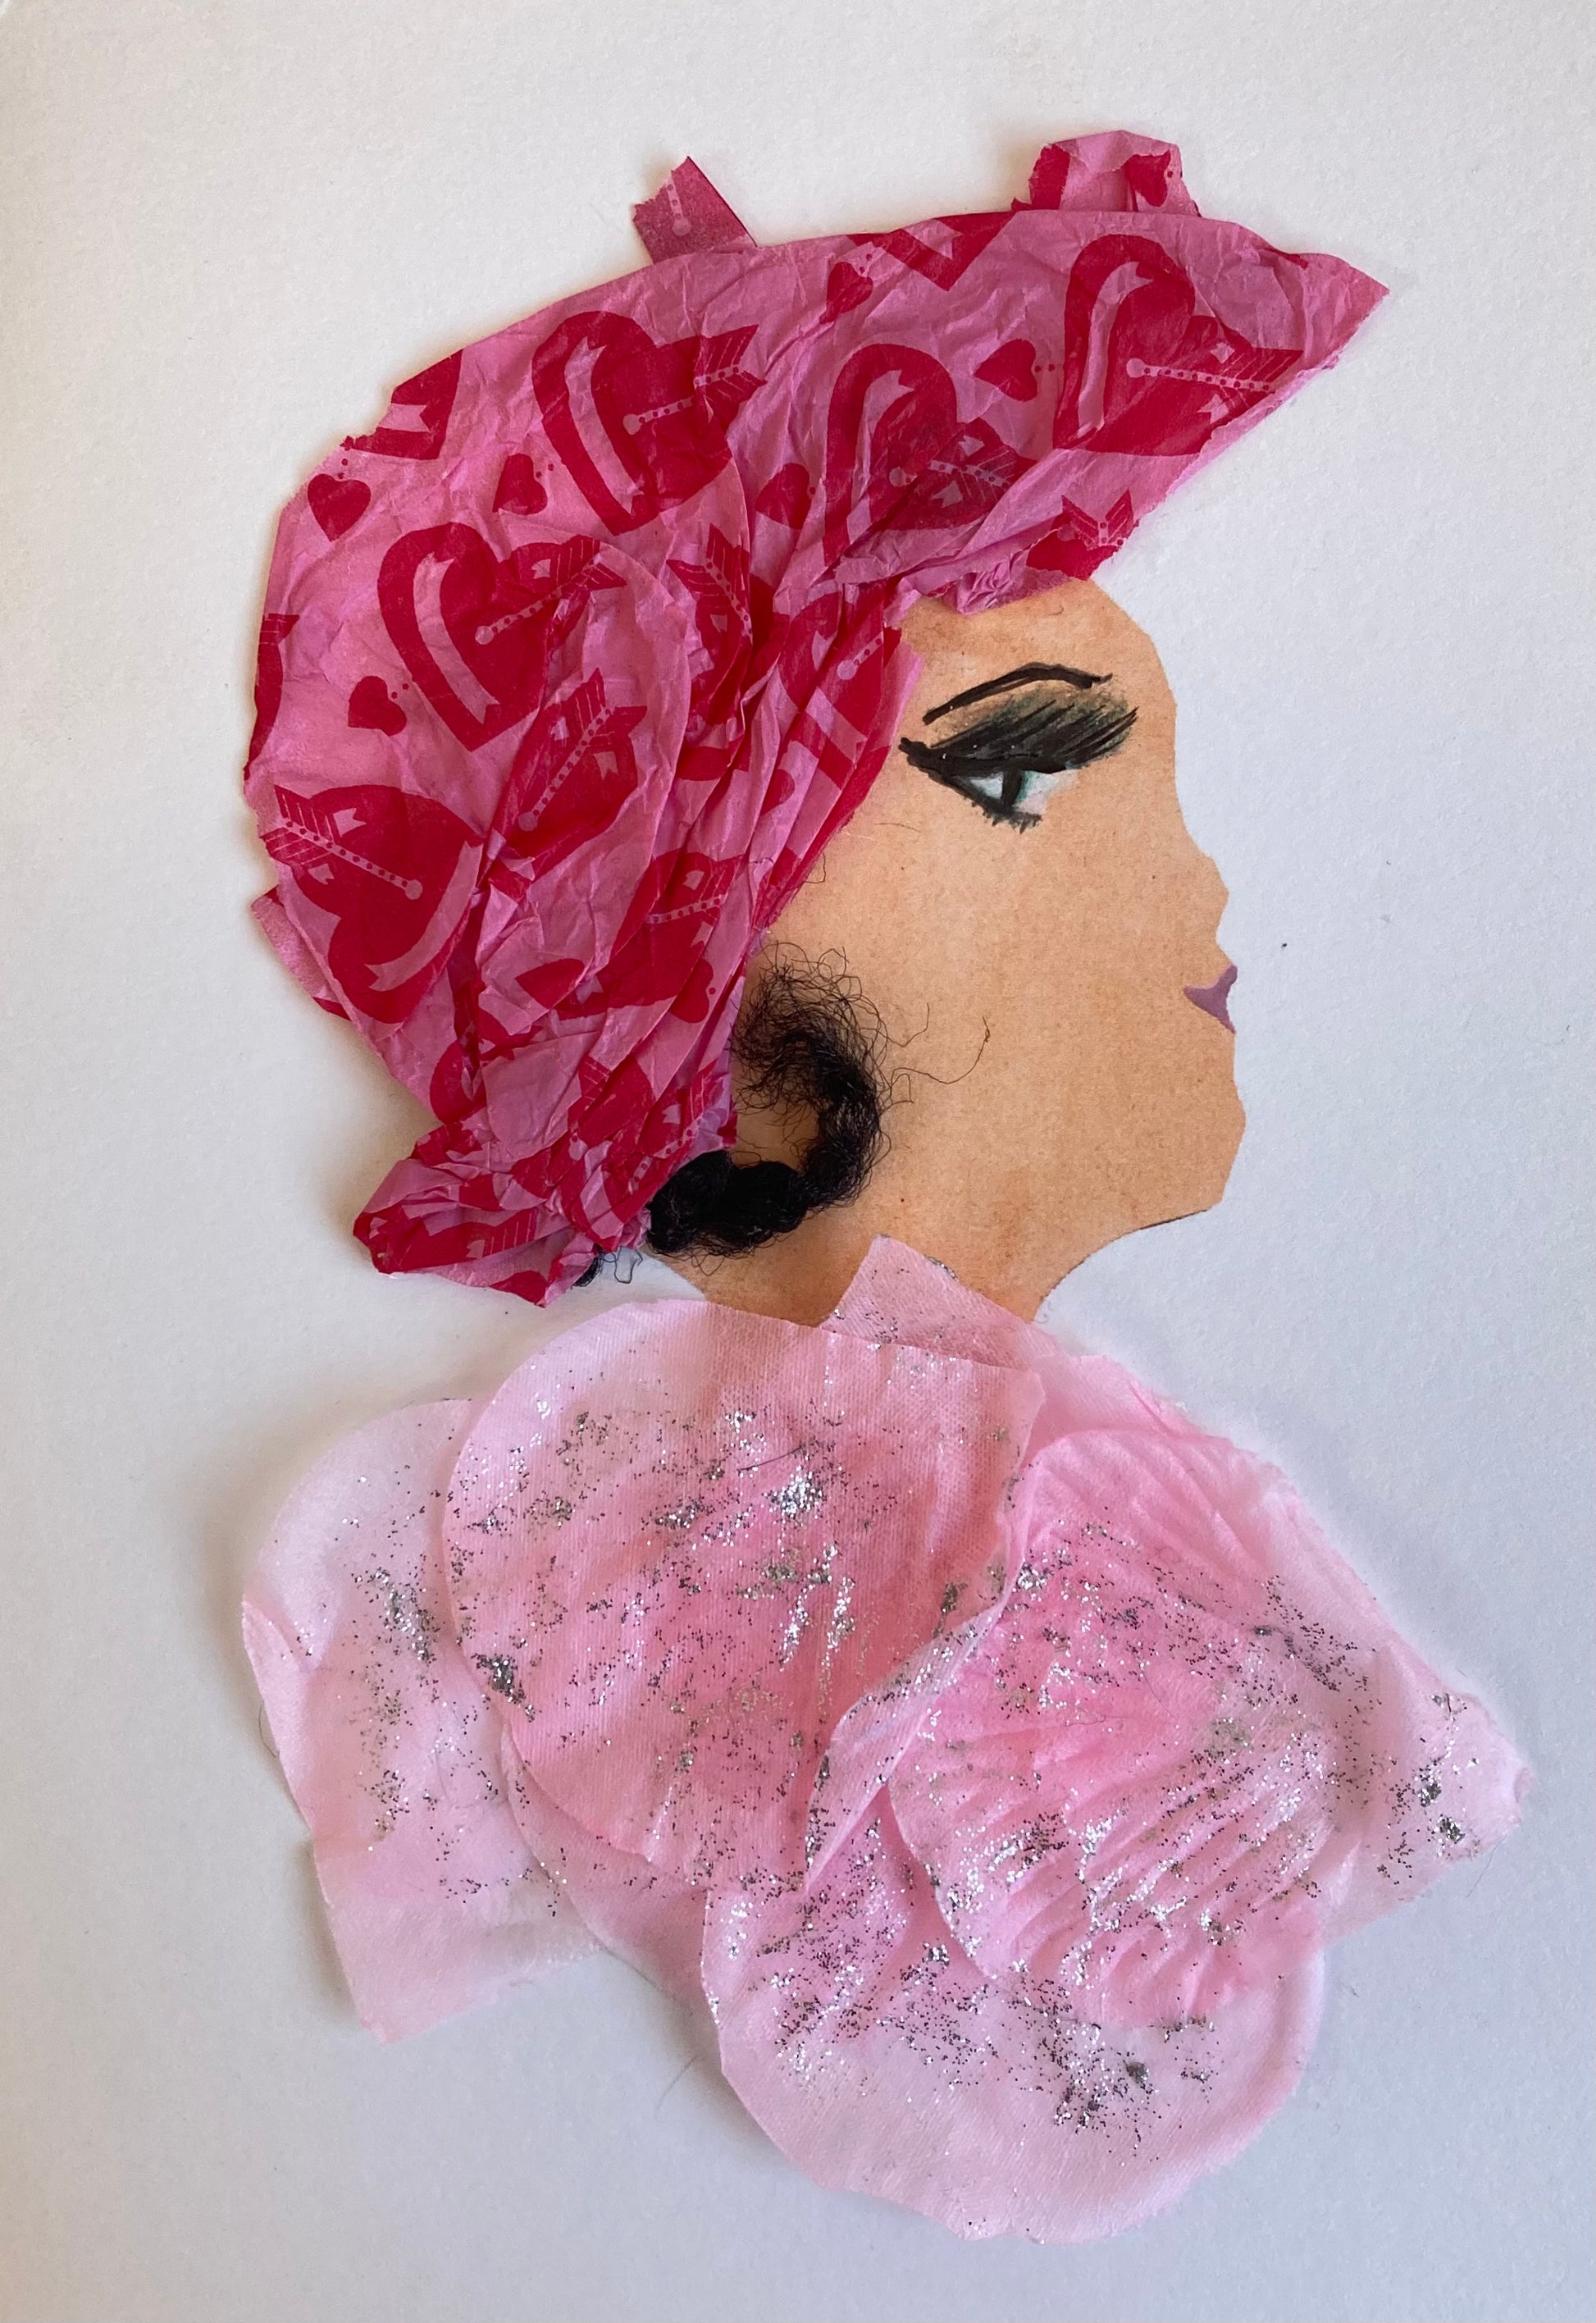 Poppy Portobello's ensemble includes a light pink top adorned with silver sparkles and a head-wrap of bright pink featuring red hearts, with a curl of her dark tresses artfully left visible.